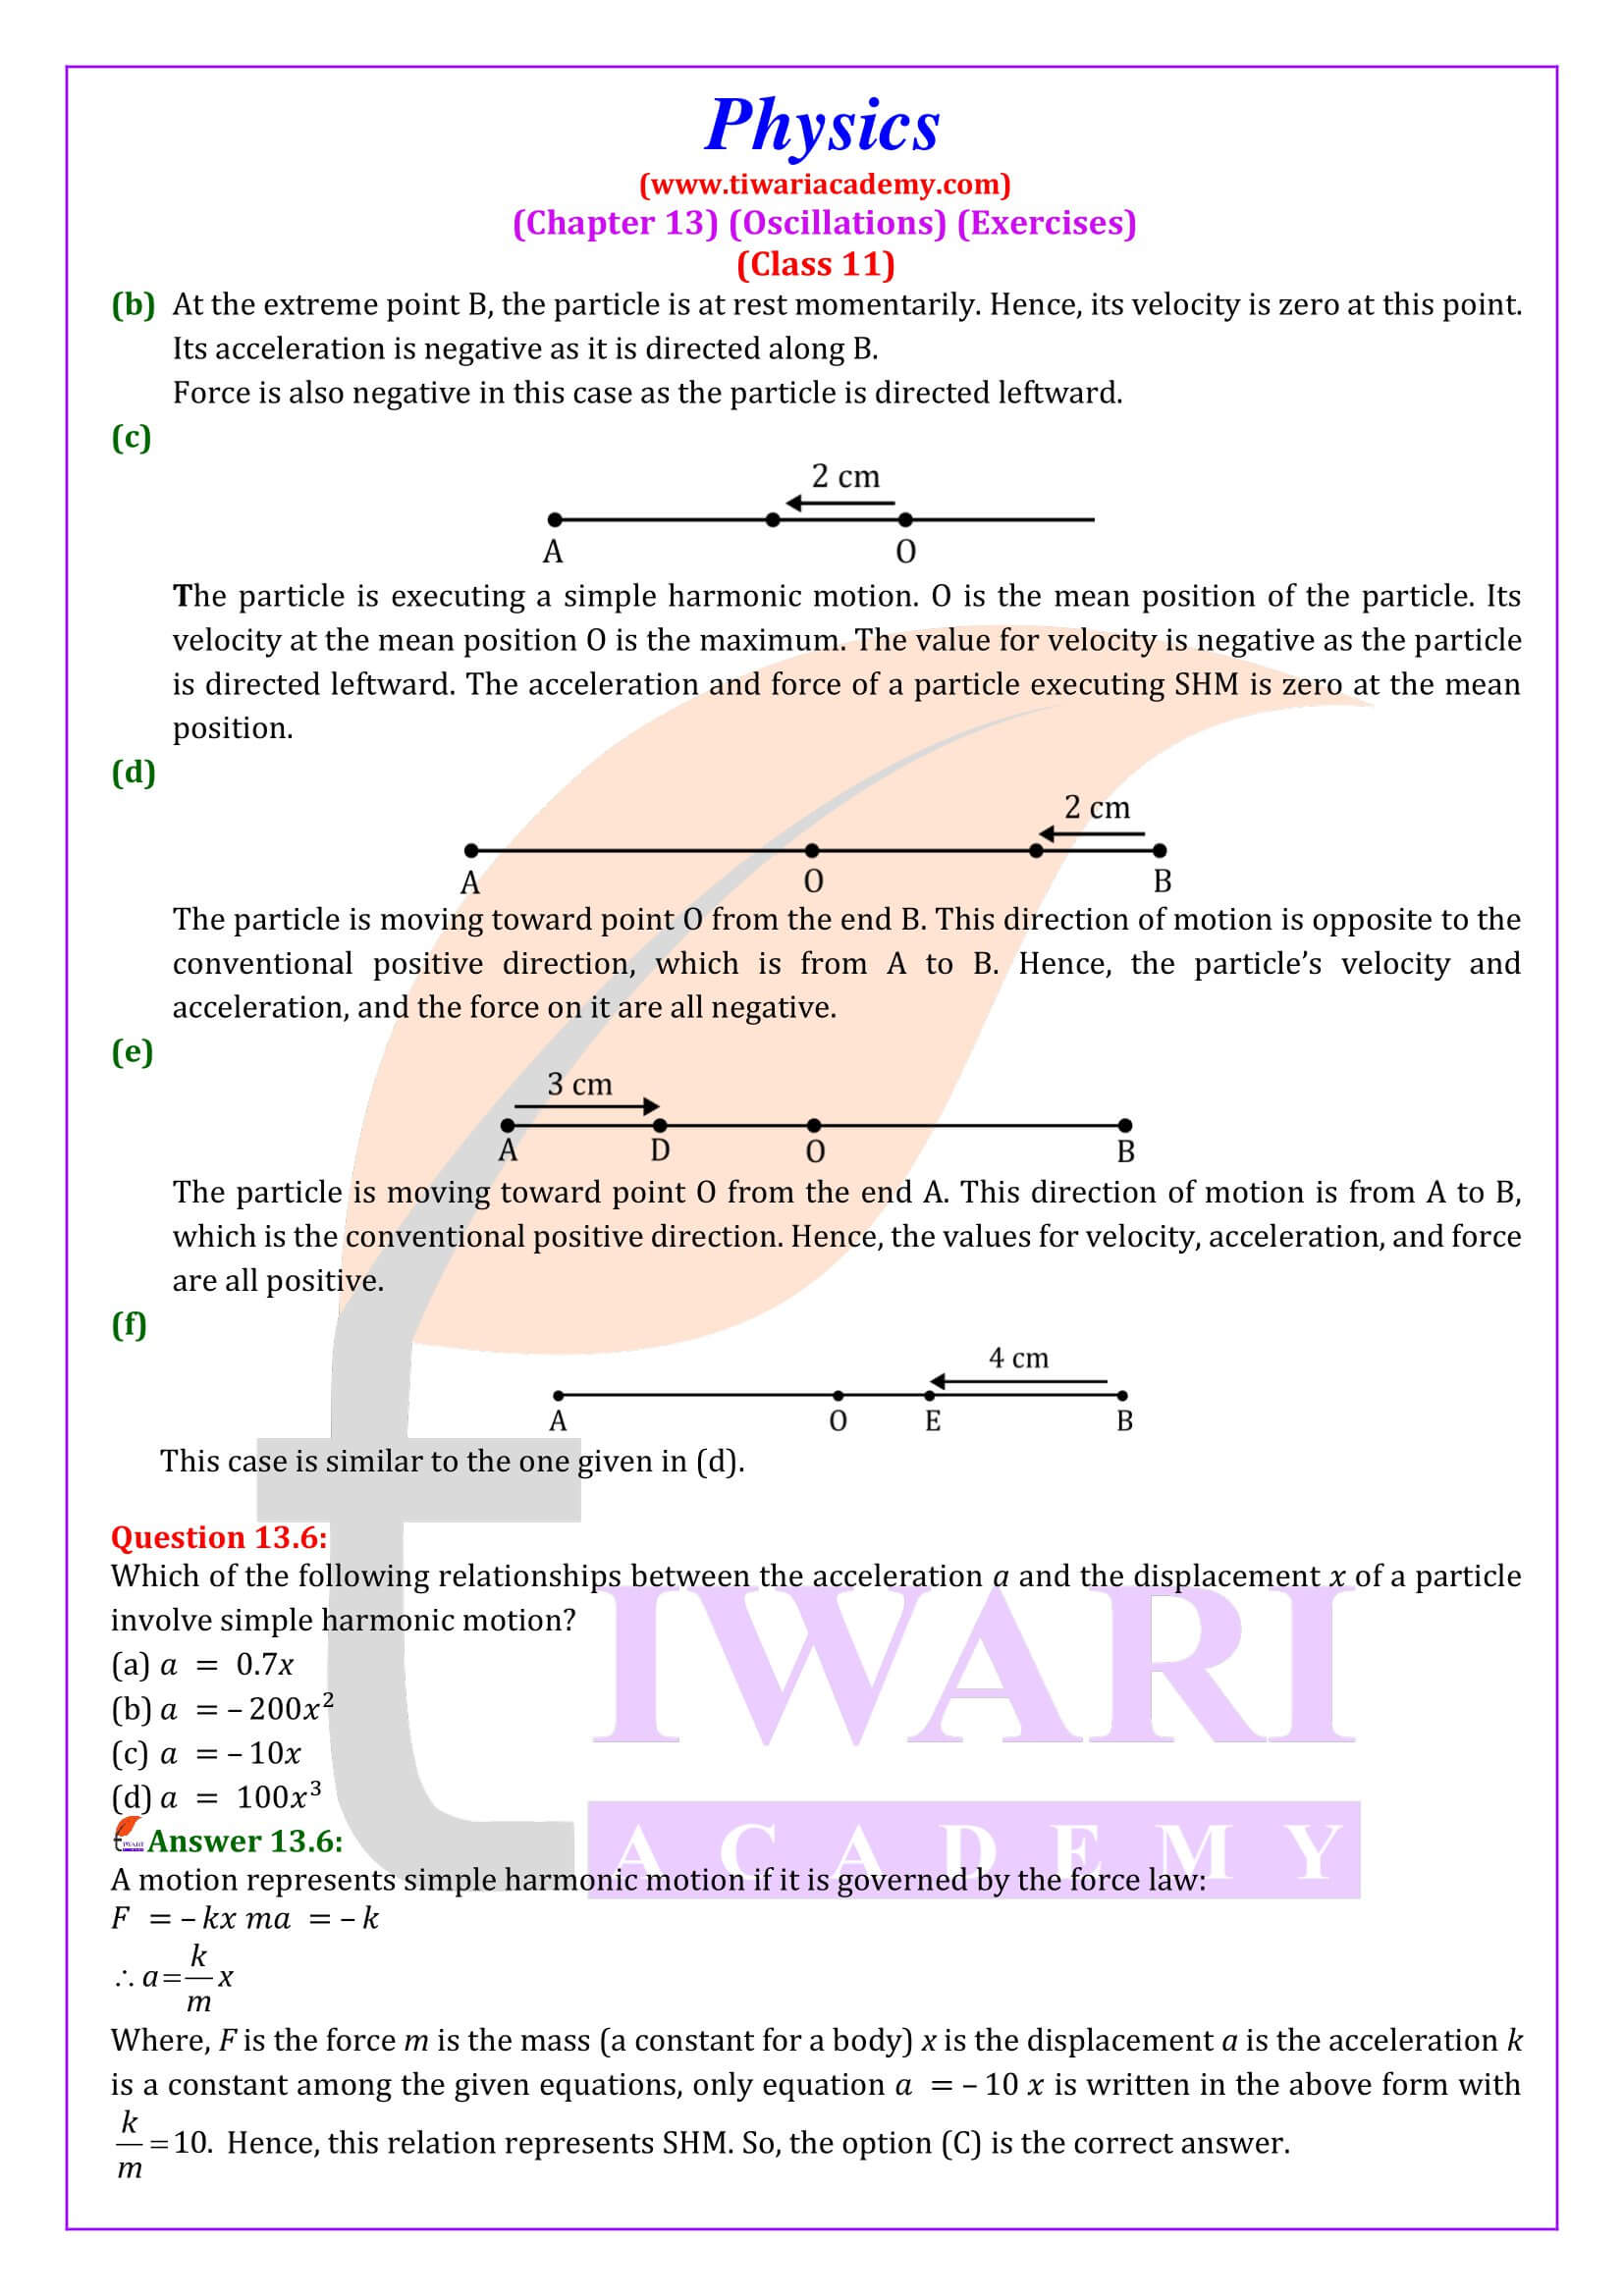 NCERT Solutions for Class 11 Physics Chapter 13 in English Medium